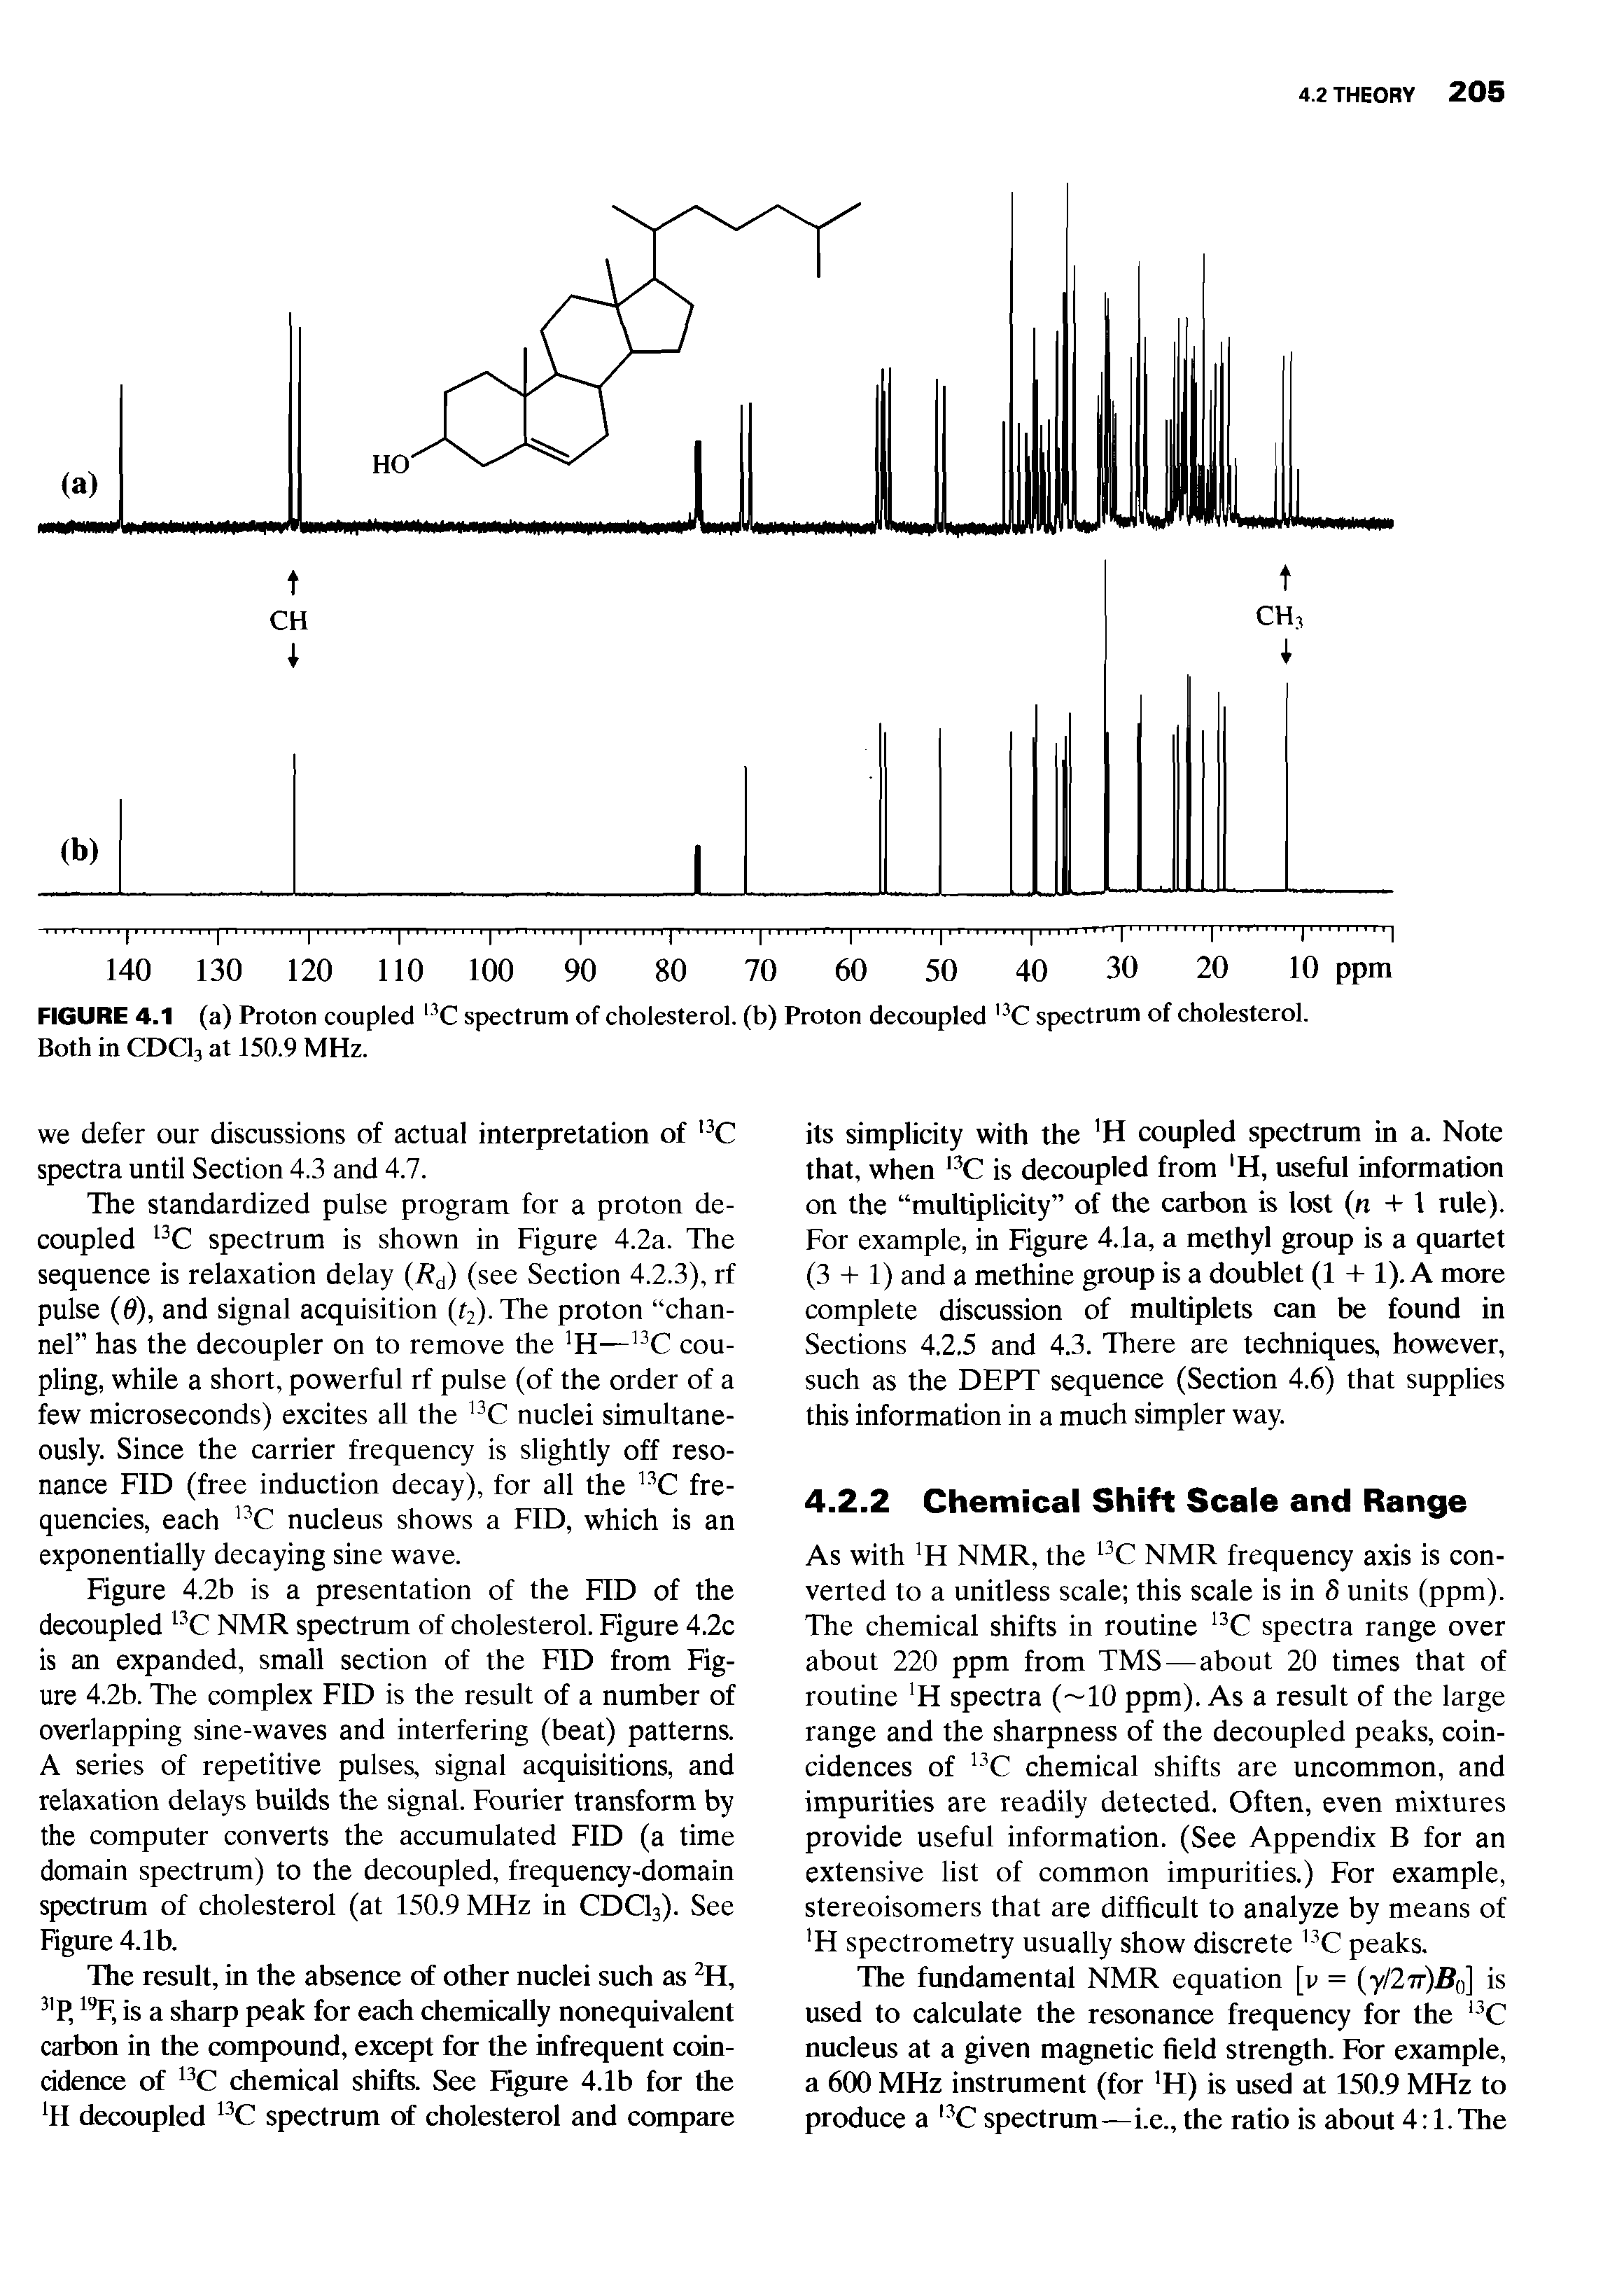 Figure 4.2b is a presentation of the FID of the decoupled 13C NMR spectrum of cholesterol. Figure 4.2c is an expanded, small section of the FID from Figure 4.2b. The complex FID is the result of a number of overlapping sine-waves and interfering (beat) patterns. A series of repetitive pulses, signal acquisitions, and relaxation delays builds the signal. Fourier transform by the computer converts the accumulated FID (a time domain spectrum) to the decoupled, frequency-domain spectrum of cholesterol (at 150.9 MHz in CDC13). See Figure 4.1b.